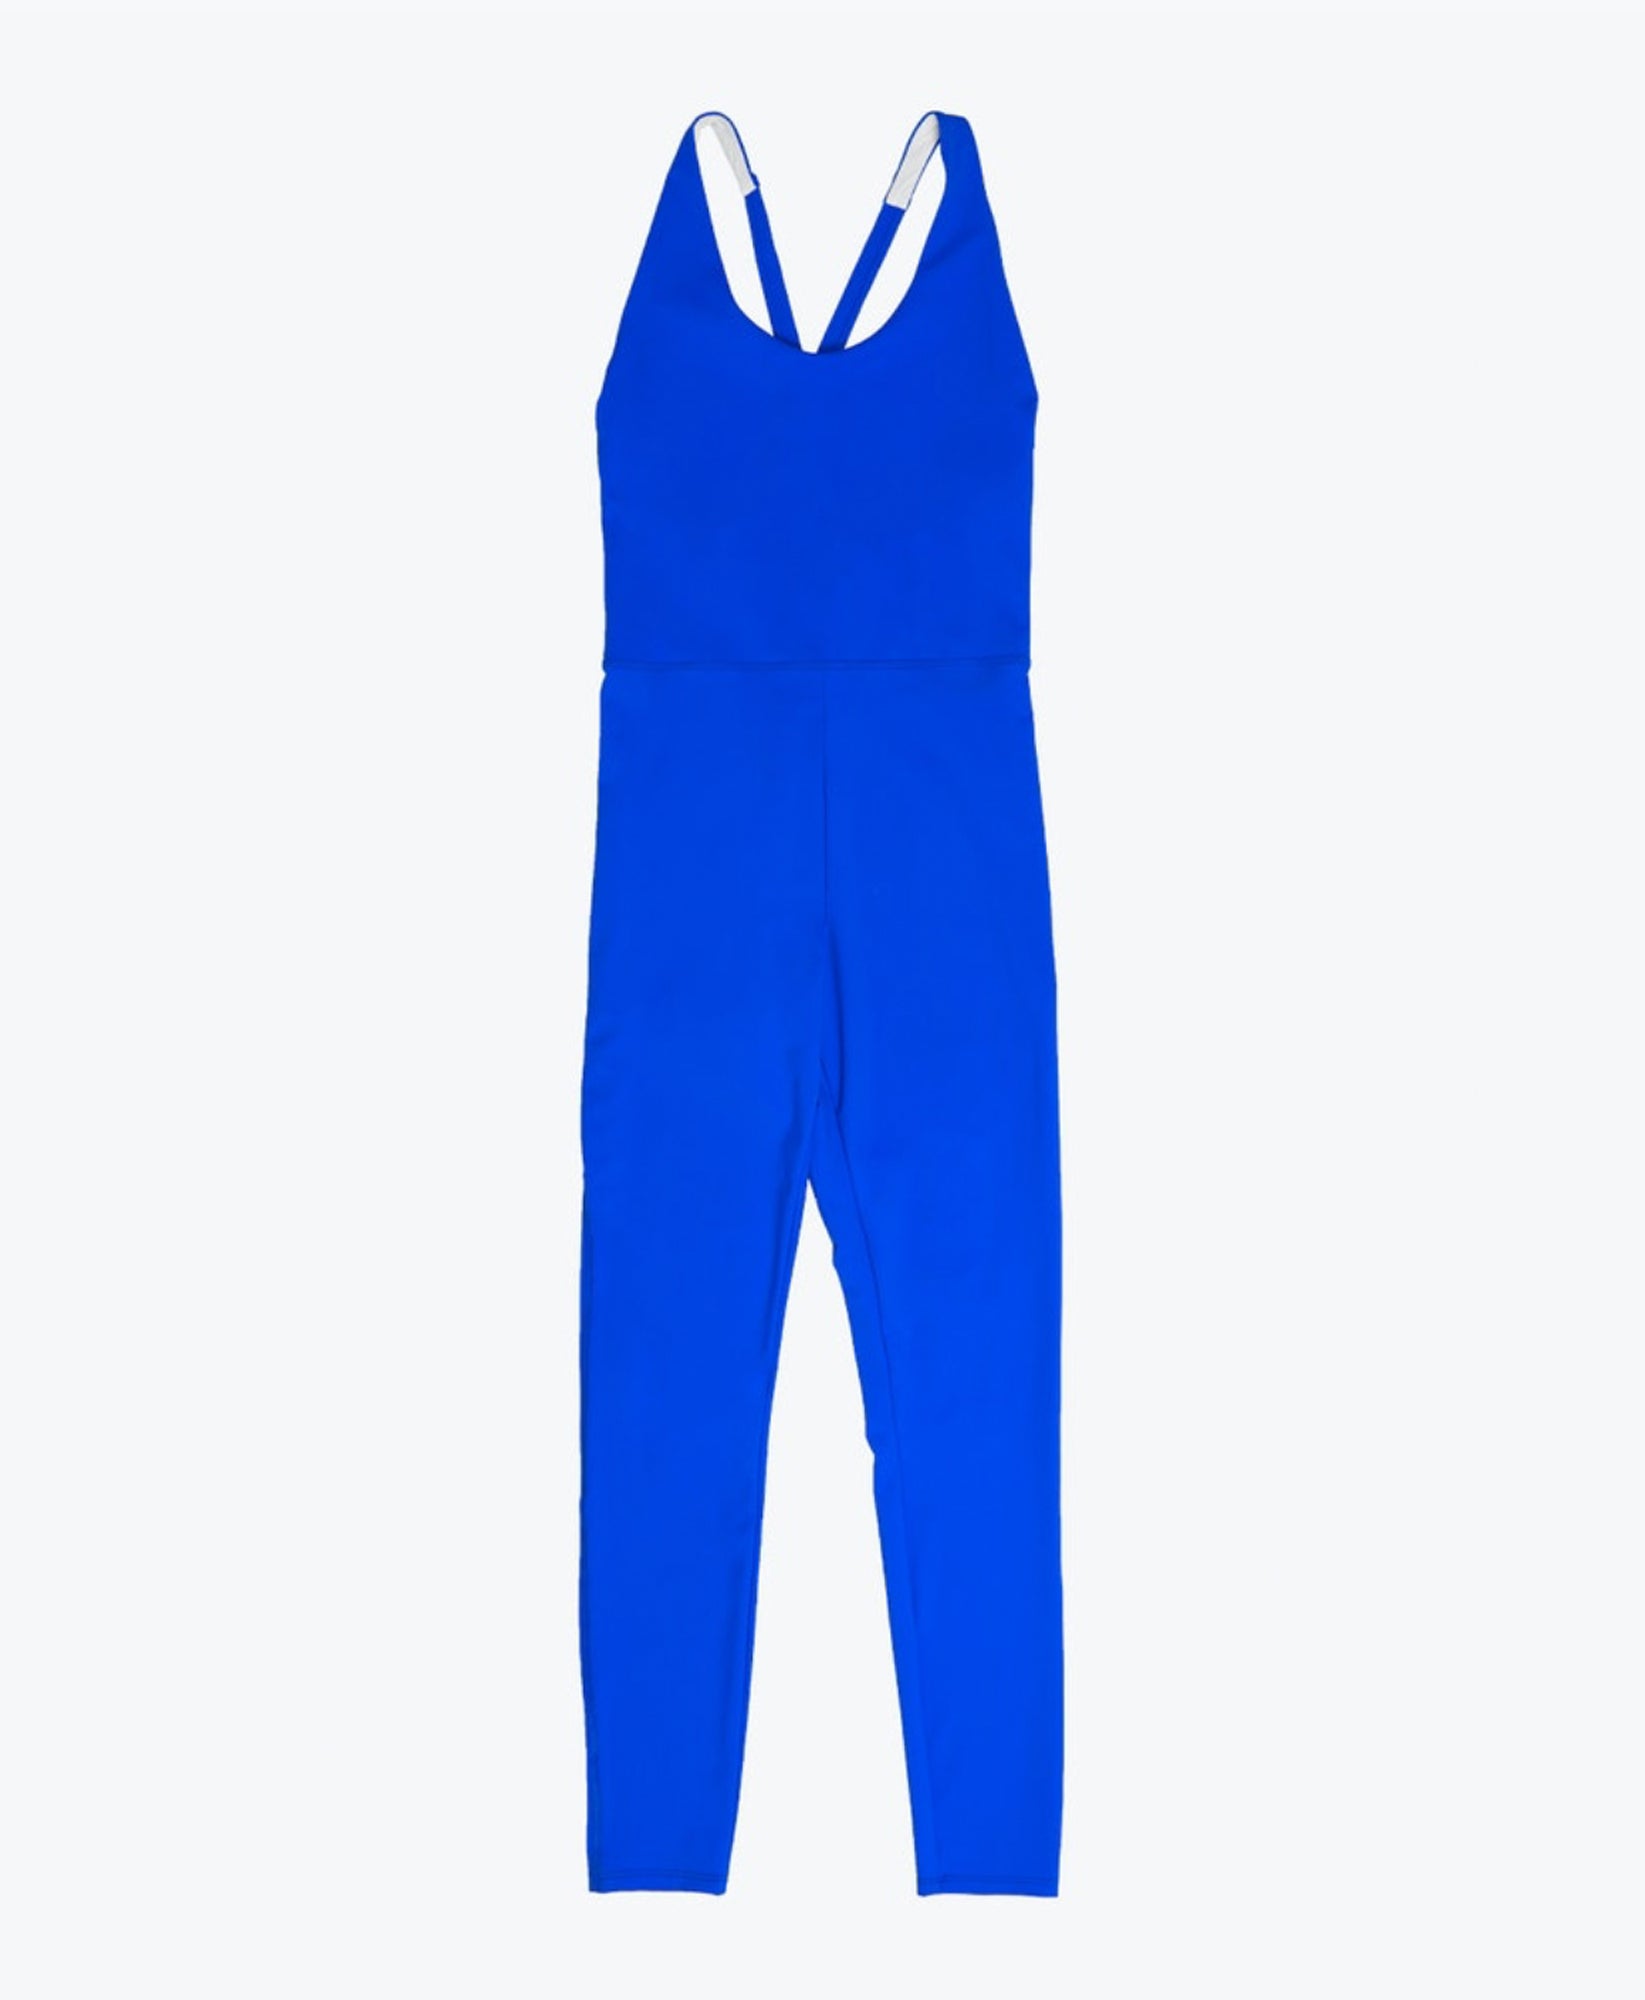 Wear One's At Liberty Unitard in Royal Blue on Model Main Full Front View